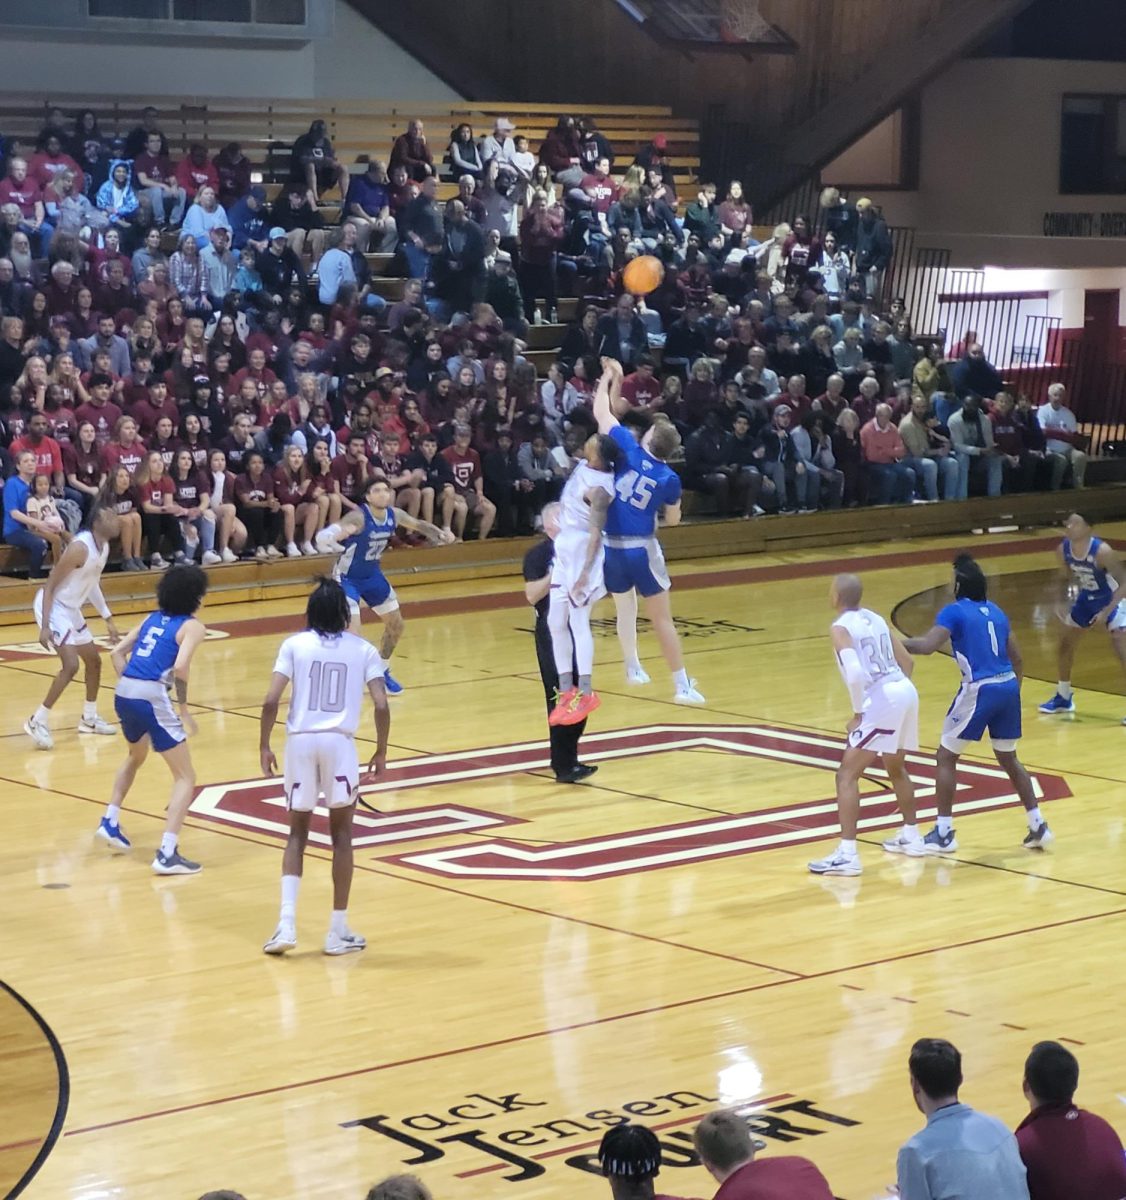 Guilford College hosted the Quakers men’s basketball NCAA Division III quarterfinals game against Christopher Newport University on March 9.